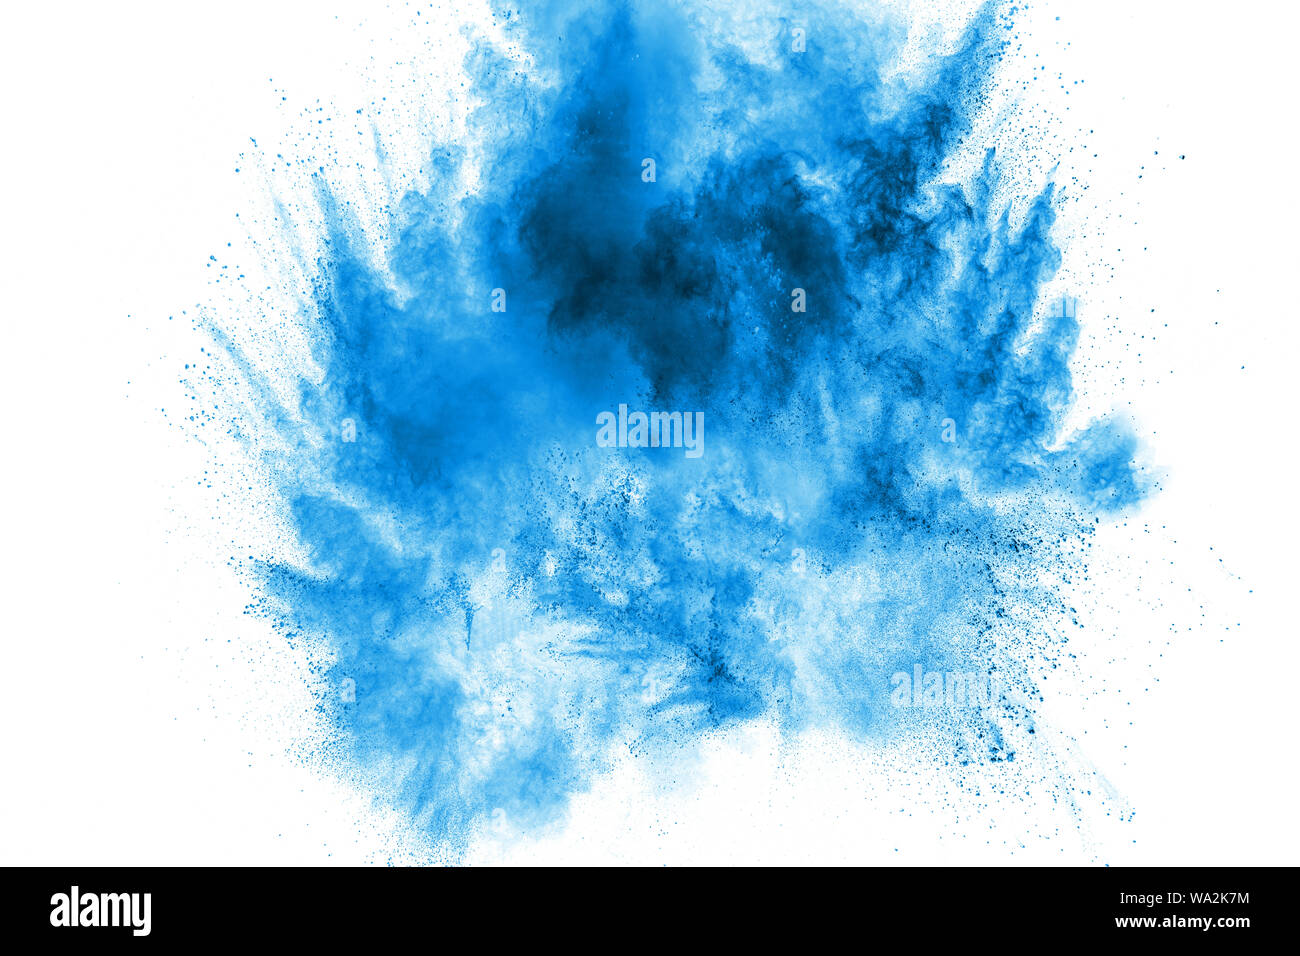 Bizarre forms of blue powder explode cloud on white background. Launched blue dust particles splashing. Stock Photo